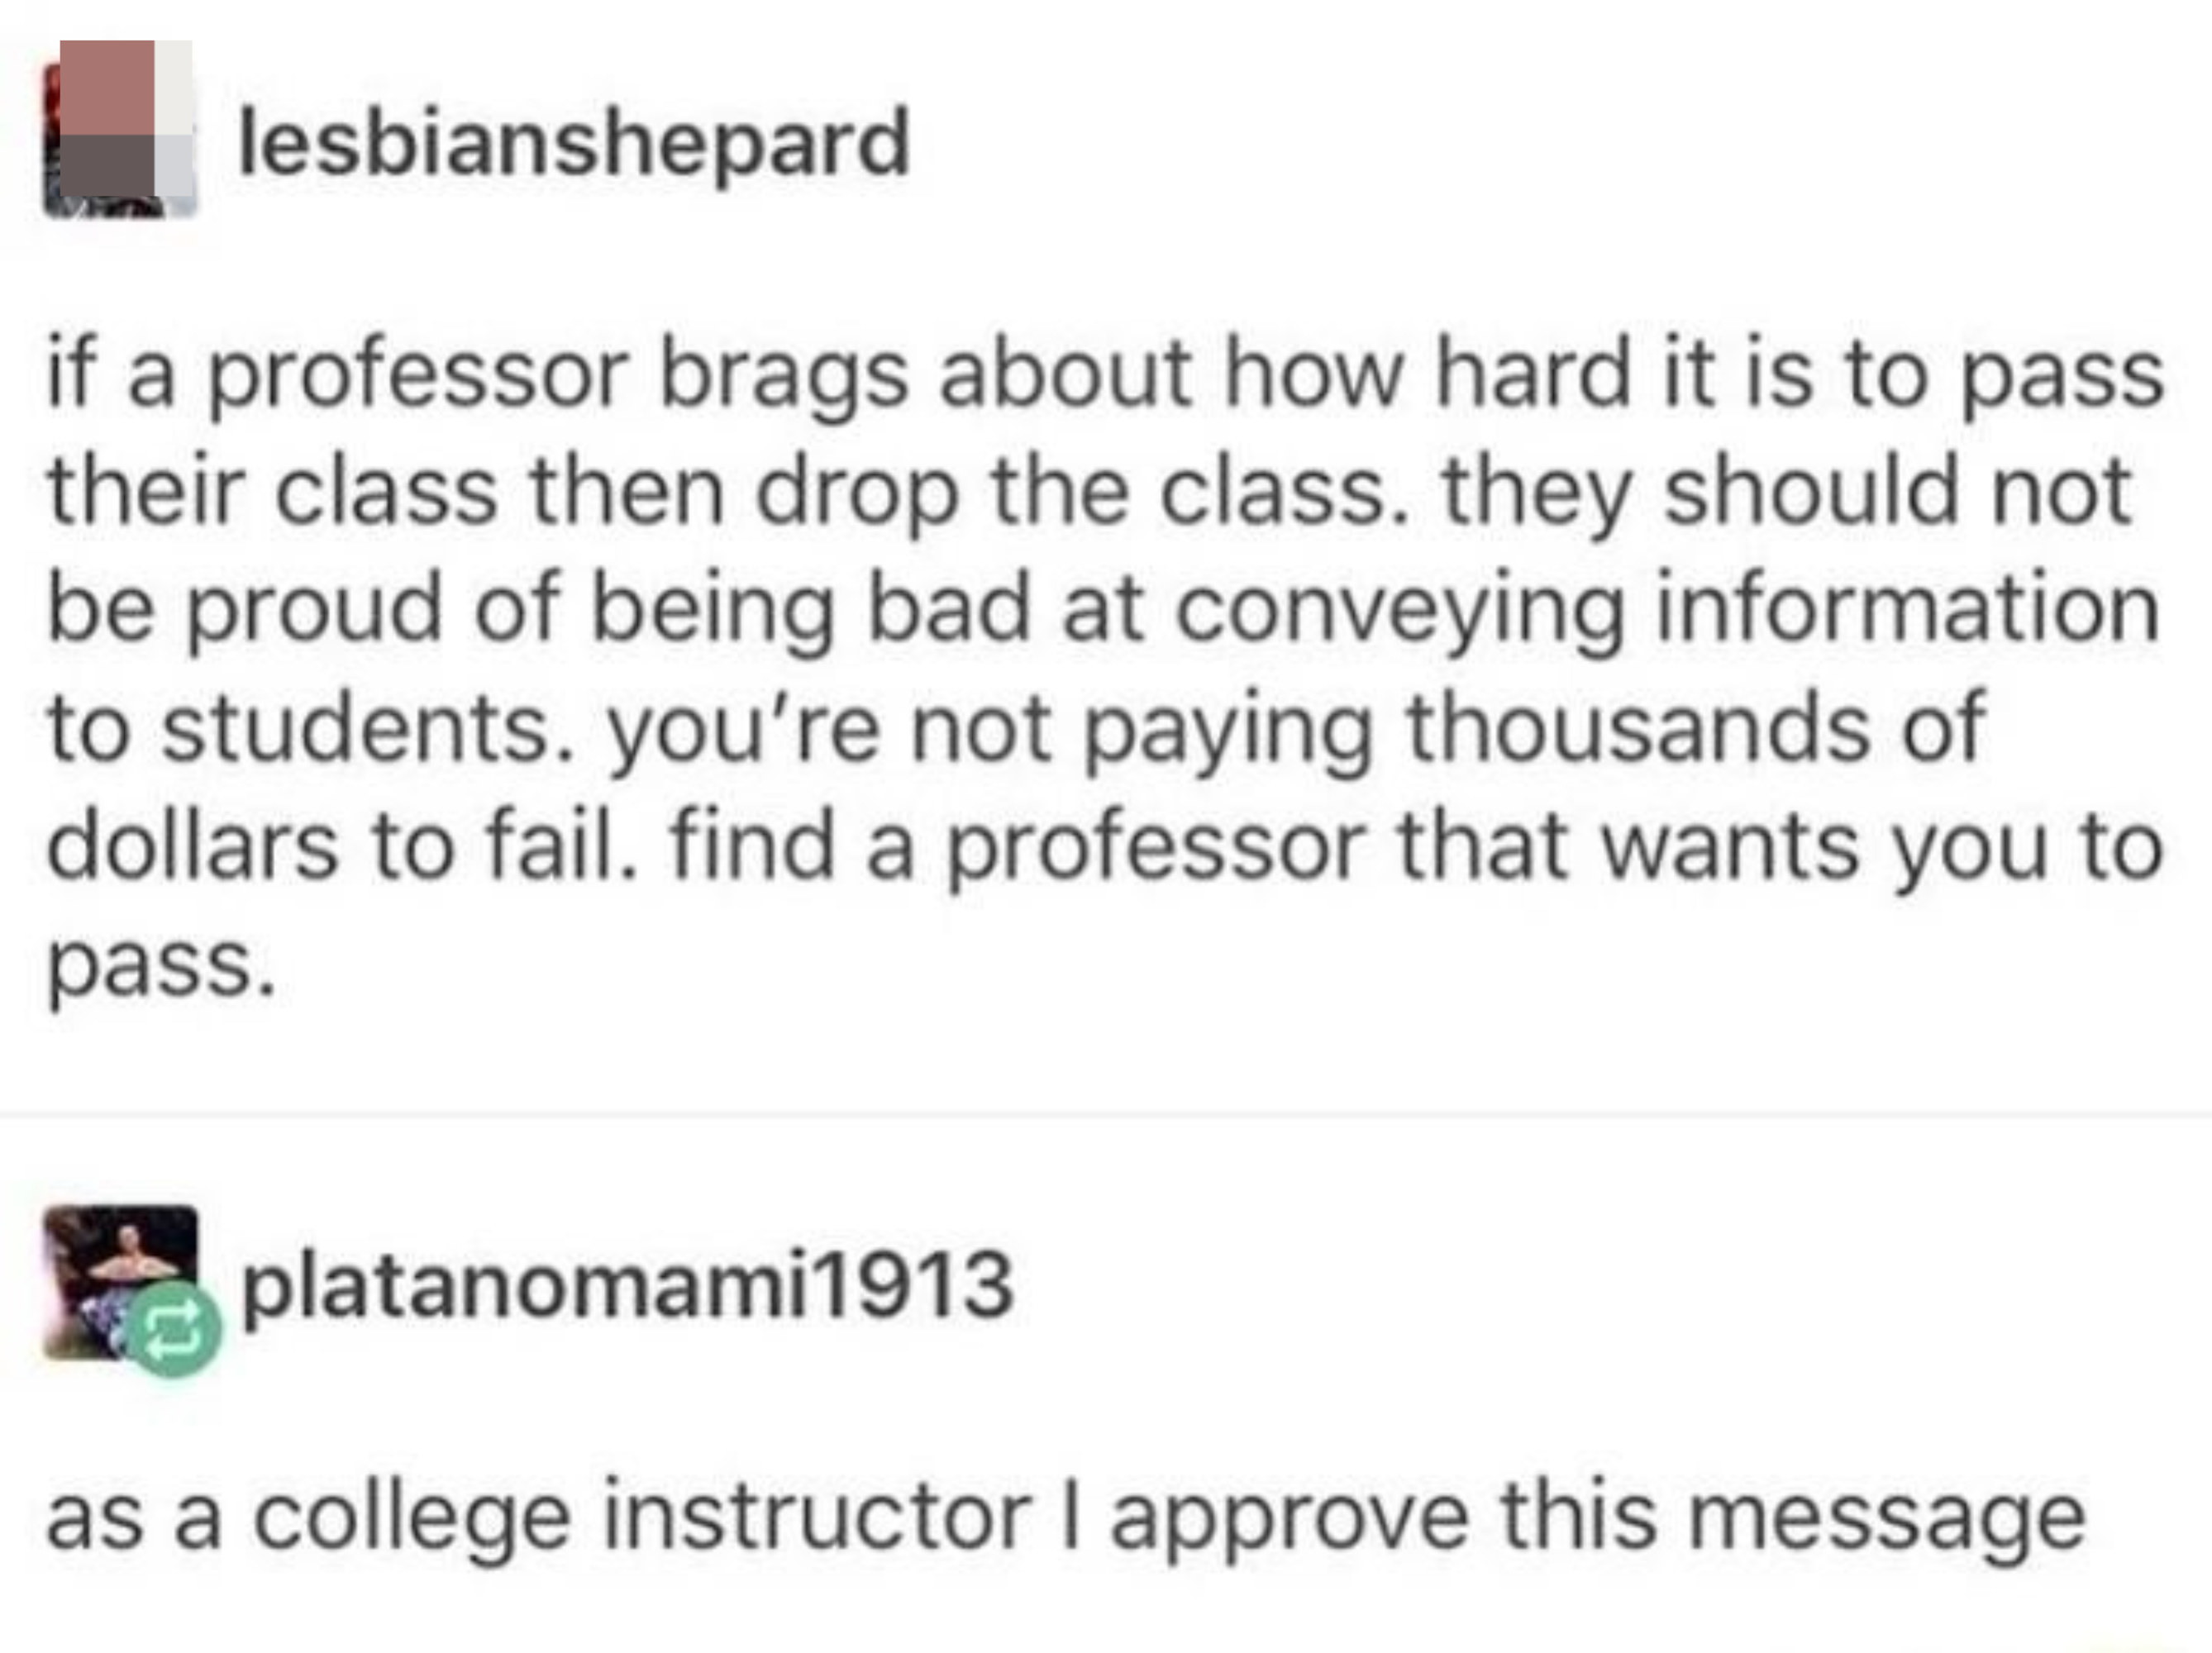 tumblr post about how if a professor brags about their class being hard its a red flag